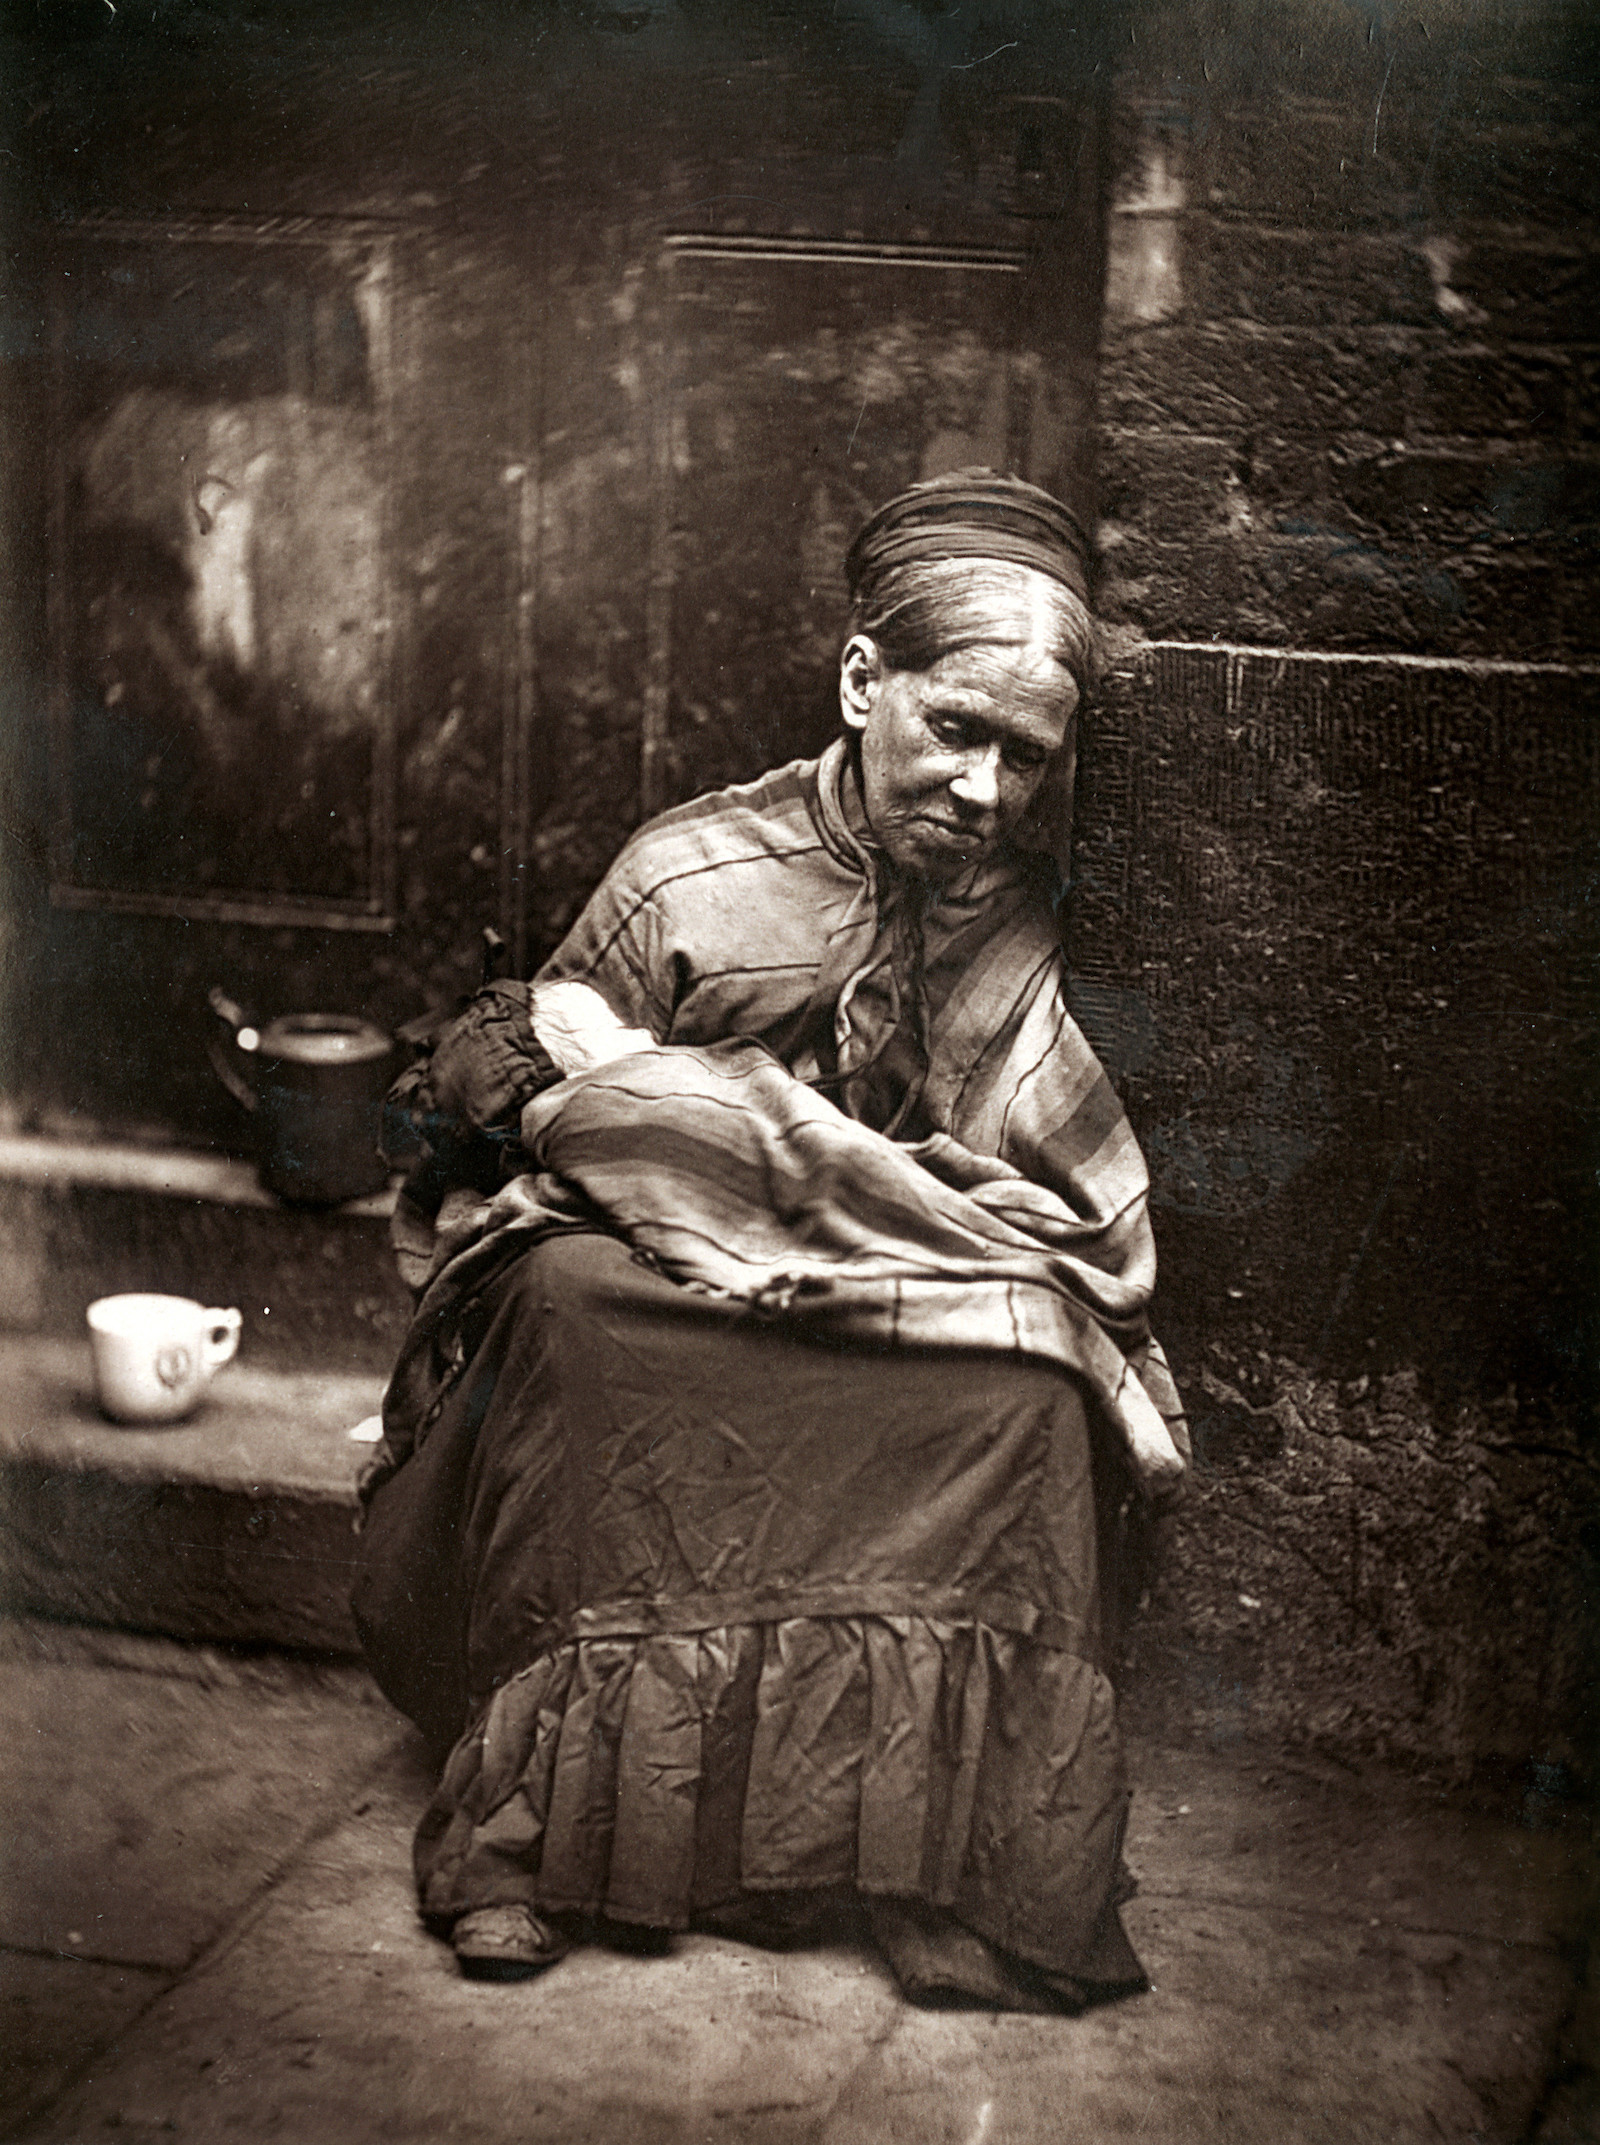 An old woman sits in a doorway, from 'Street Life in London' by John Thomson and Adolphe Smith, 1877. LSE Library. Public Domain.